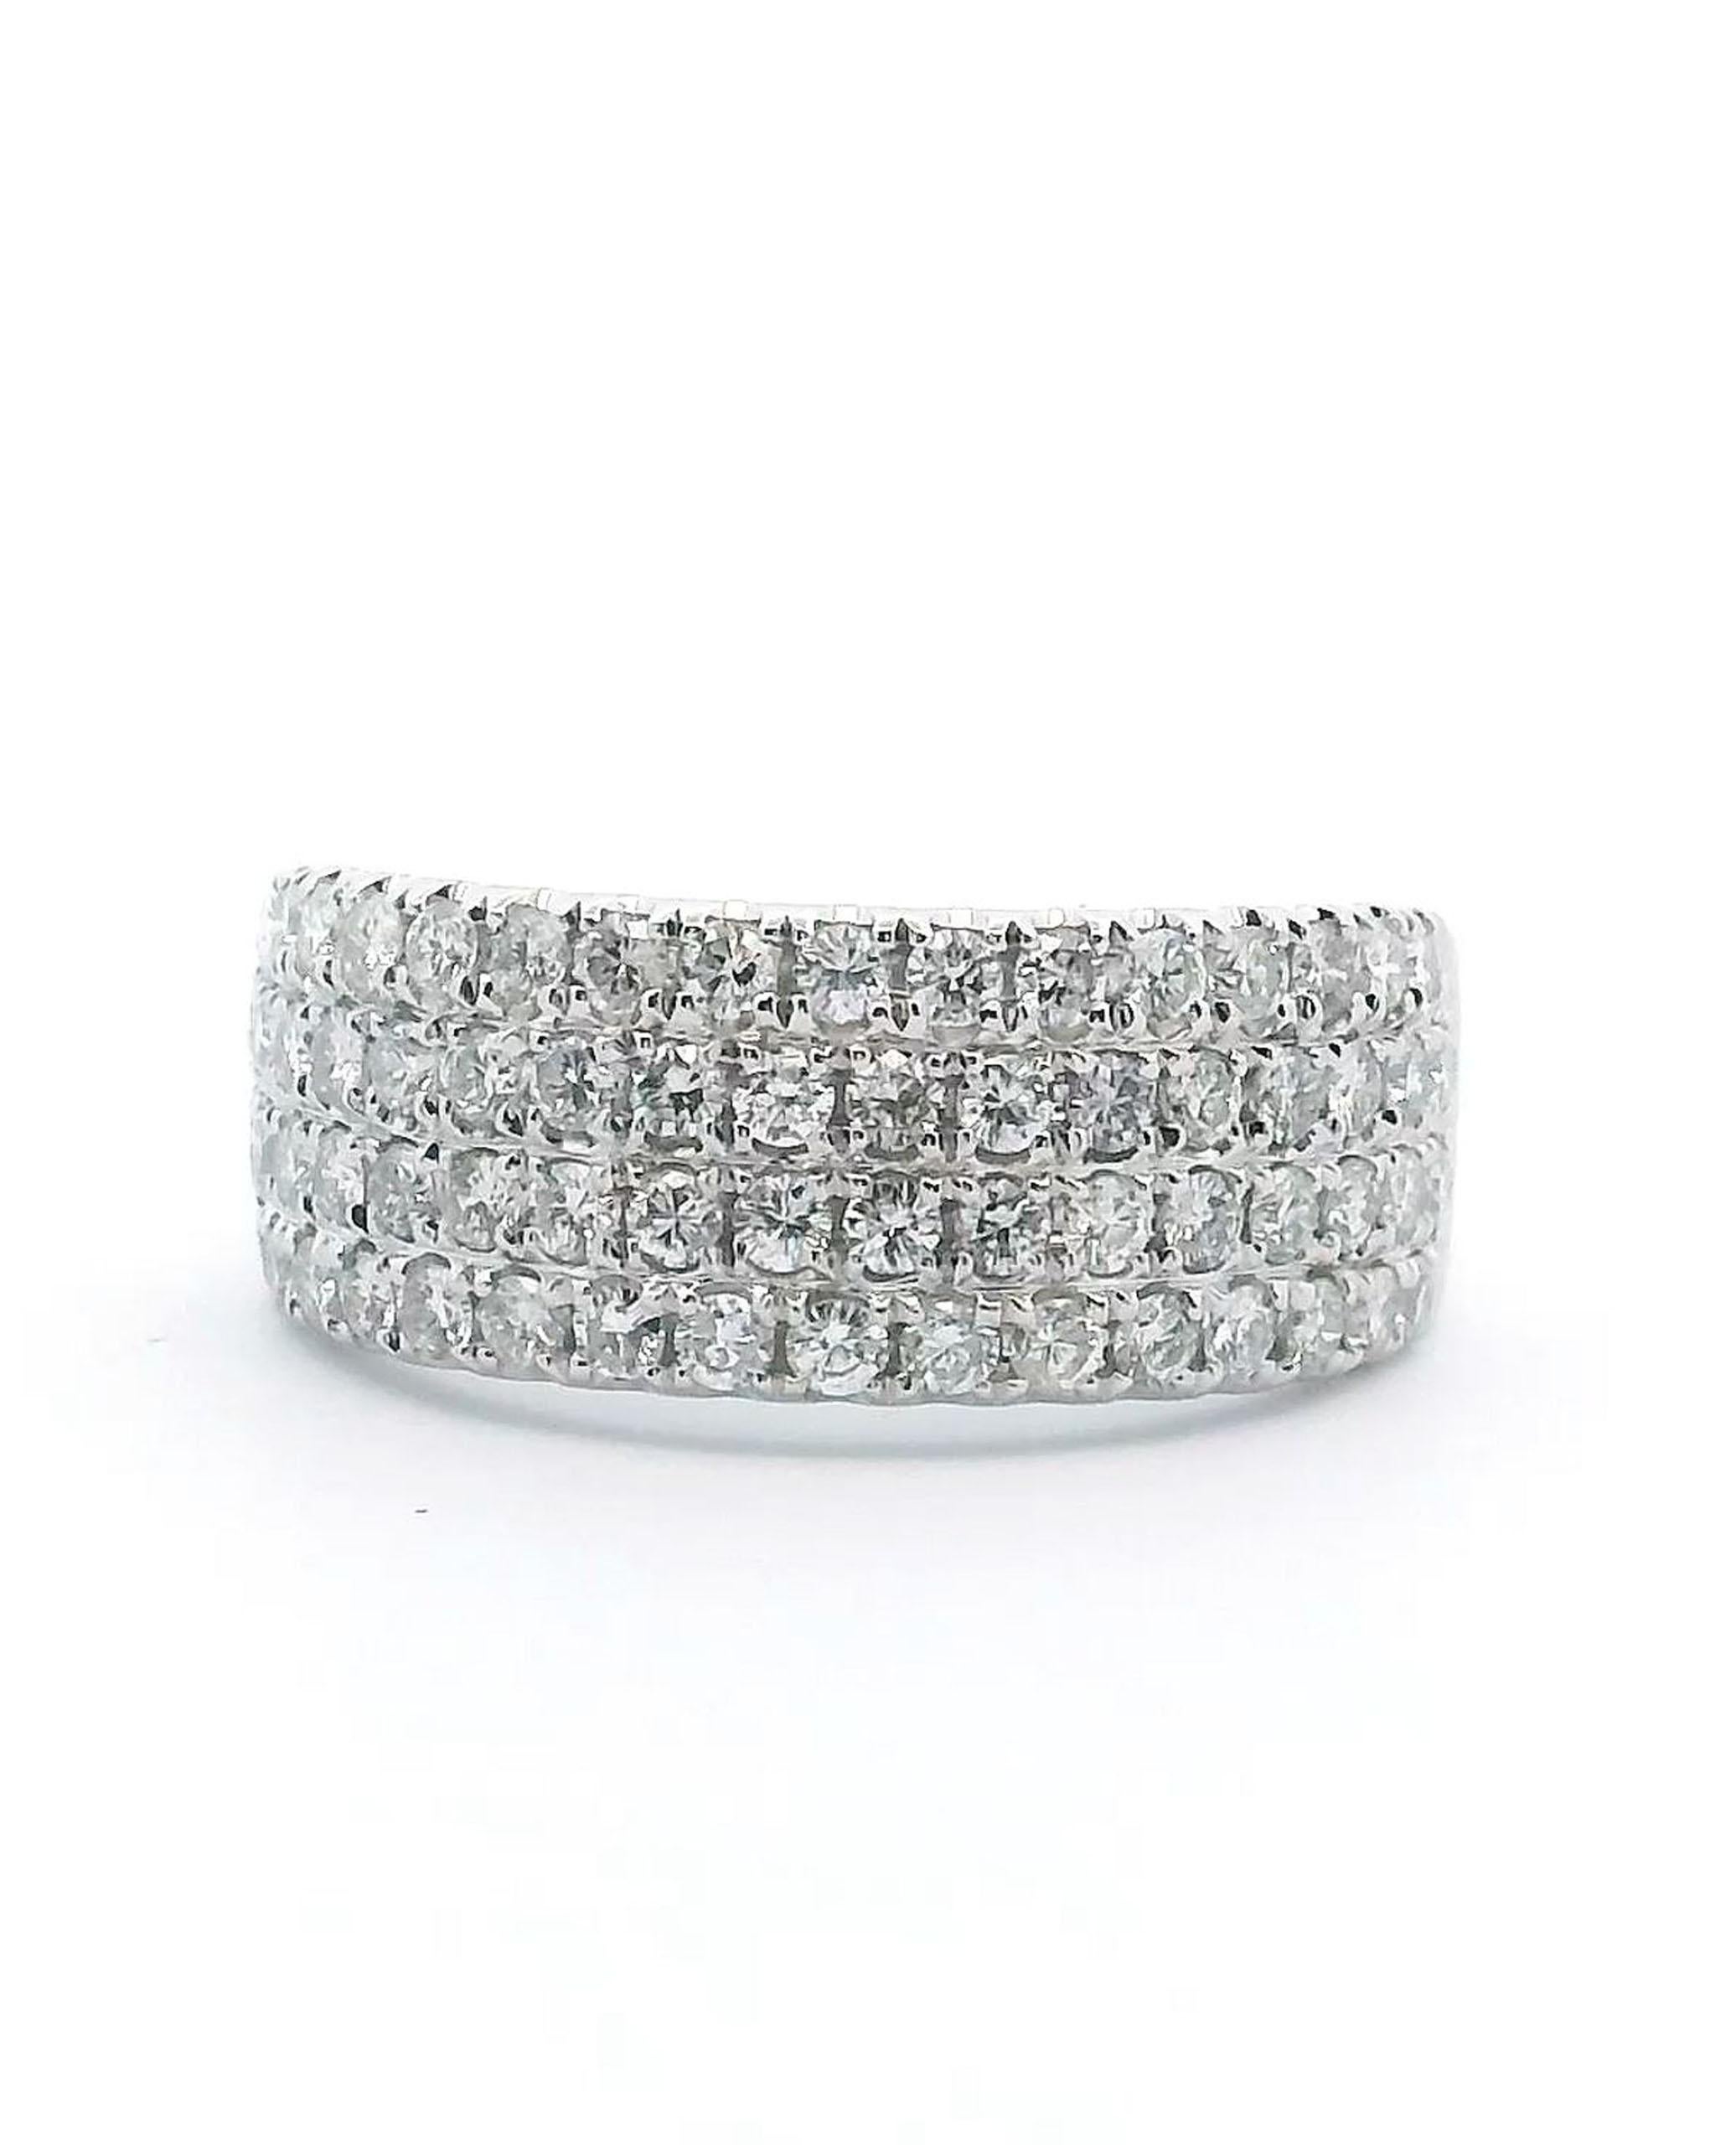 14K white gold ring with four rows of diamonds weighing 1.05 carats total.

- Finger size 6.5
- Diamonds are H color, SI clarity.